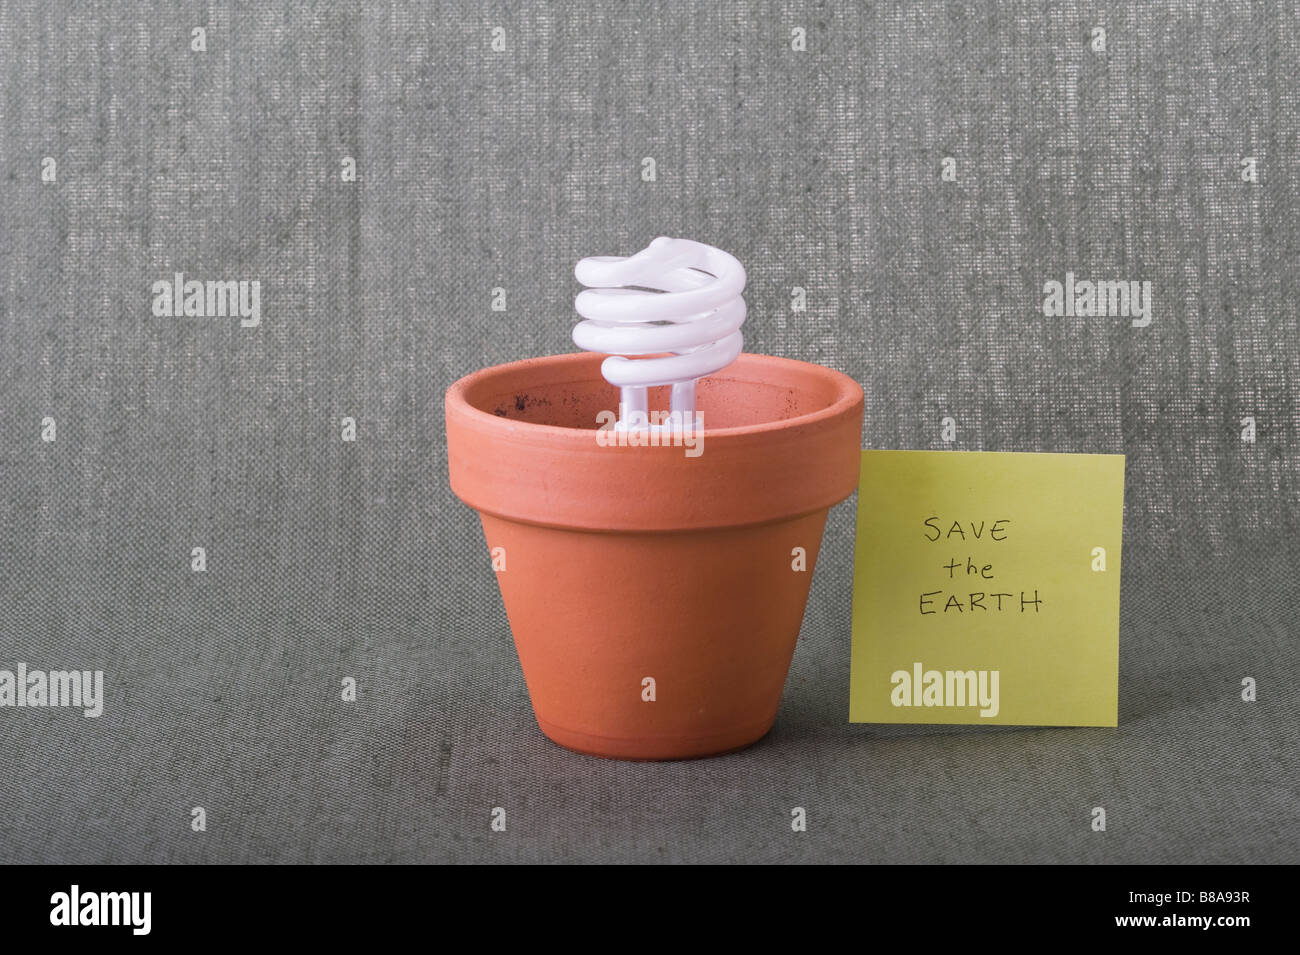 Save the Earth eco friendly energy saving compact fluorescent bulb in clay pot Earth Day climate crisis environmental responsibility concepts. Stock Photo